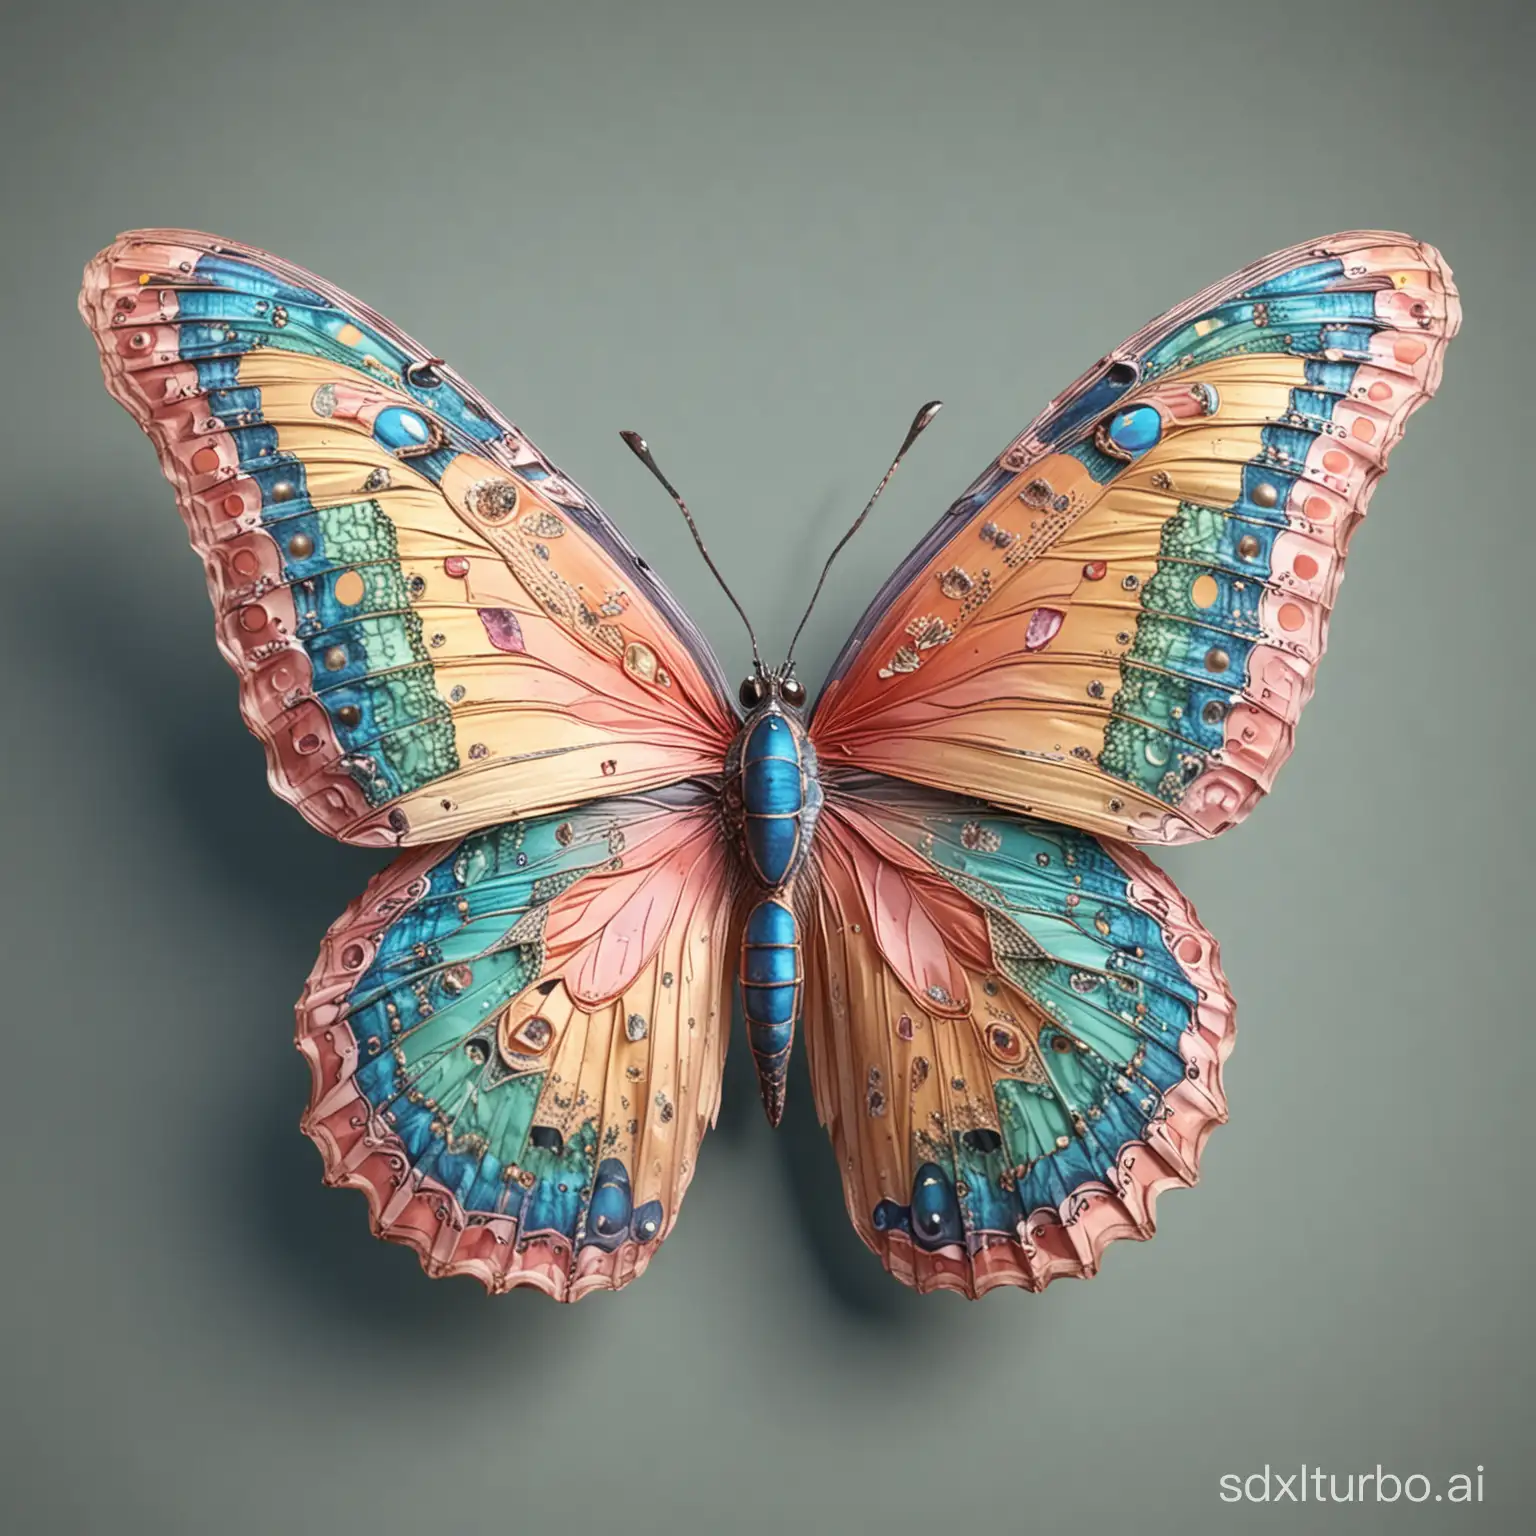 Vibrant-Butterfly-Sculpture-in-3D-Perspective